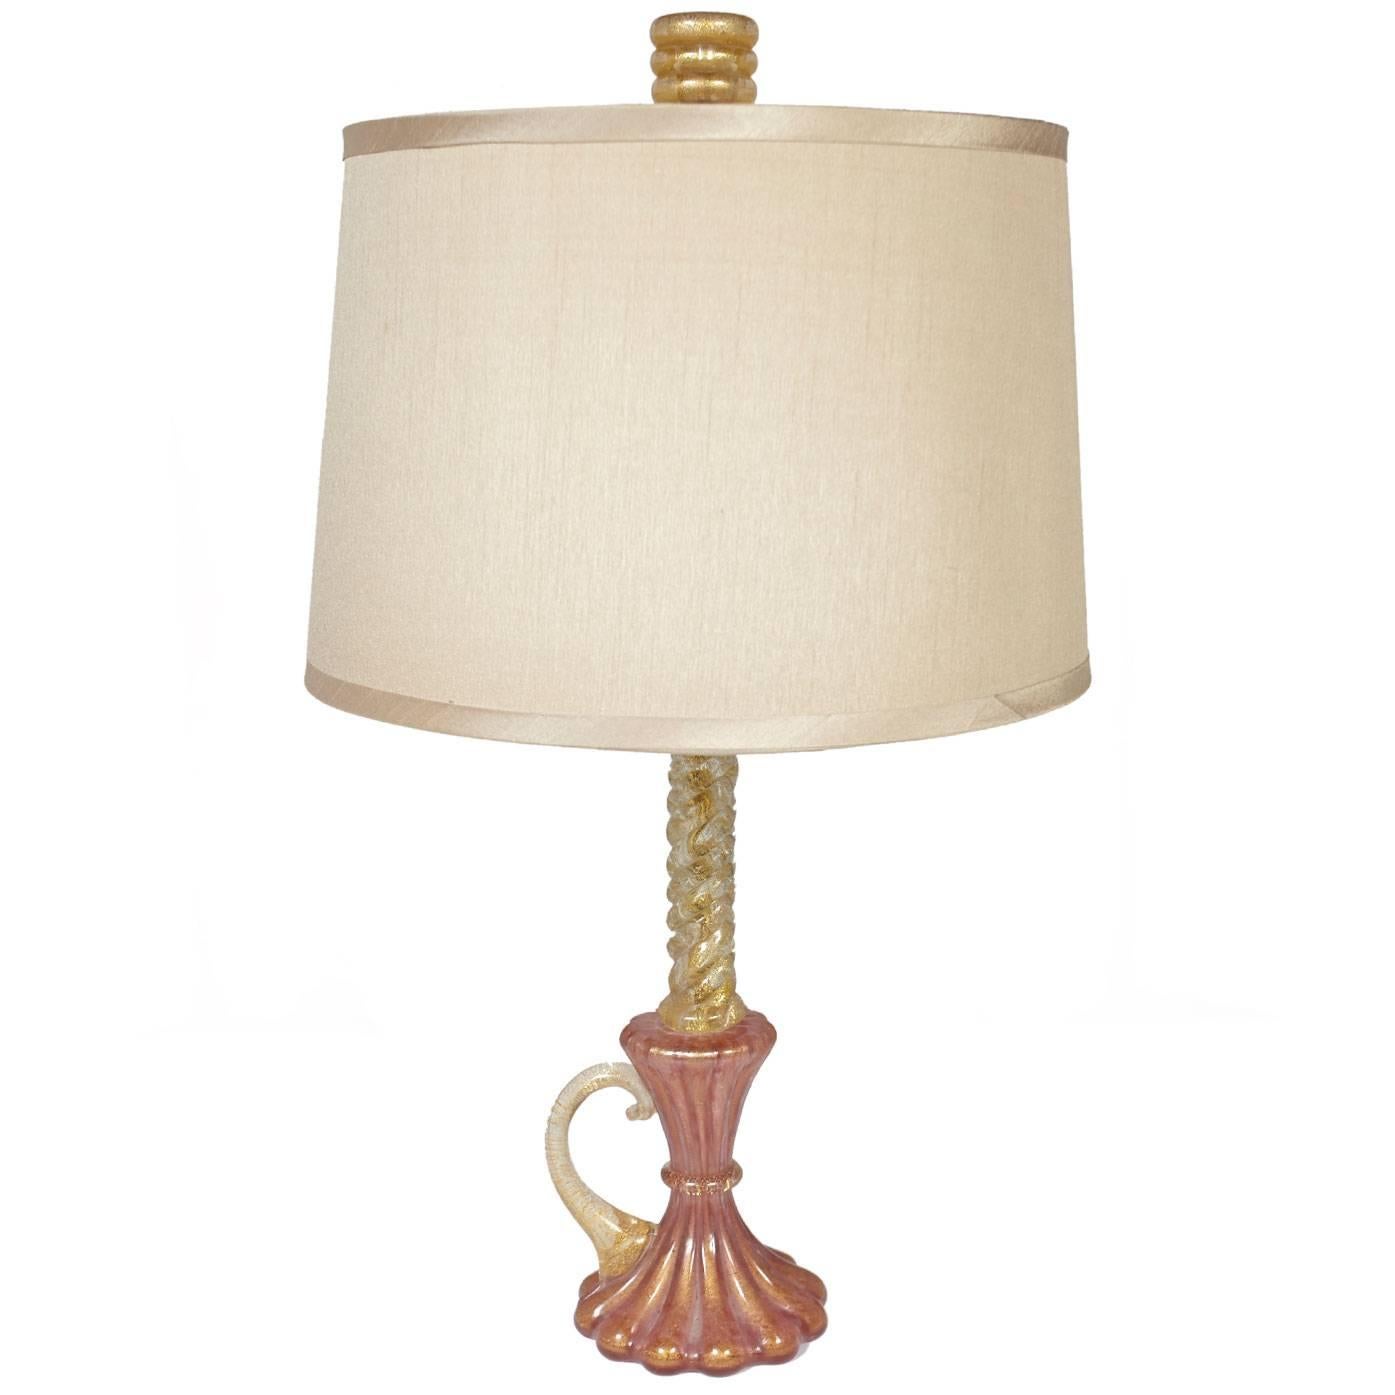 Barovier & Toso Murano Gold and Pink Table Lamp